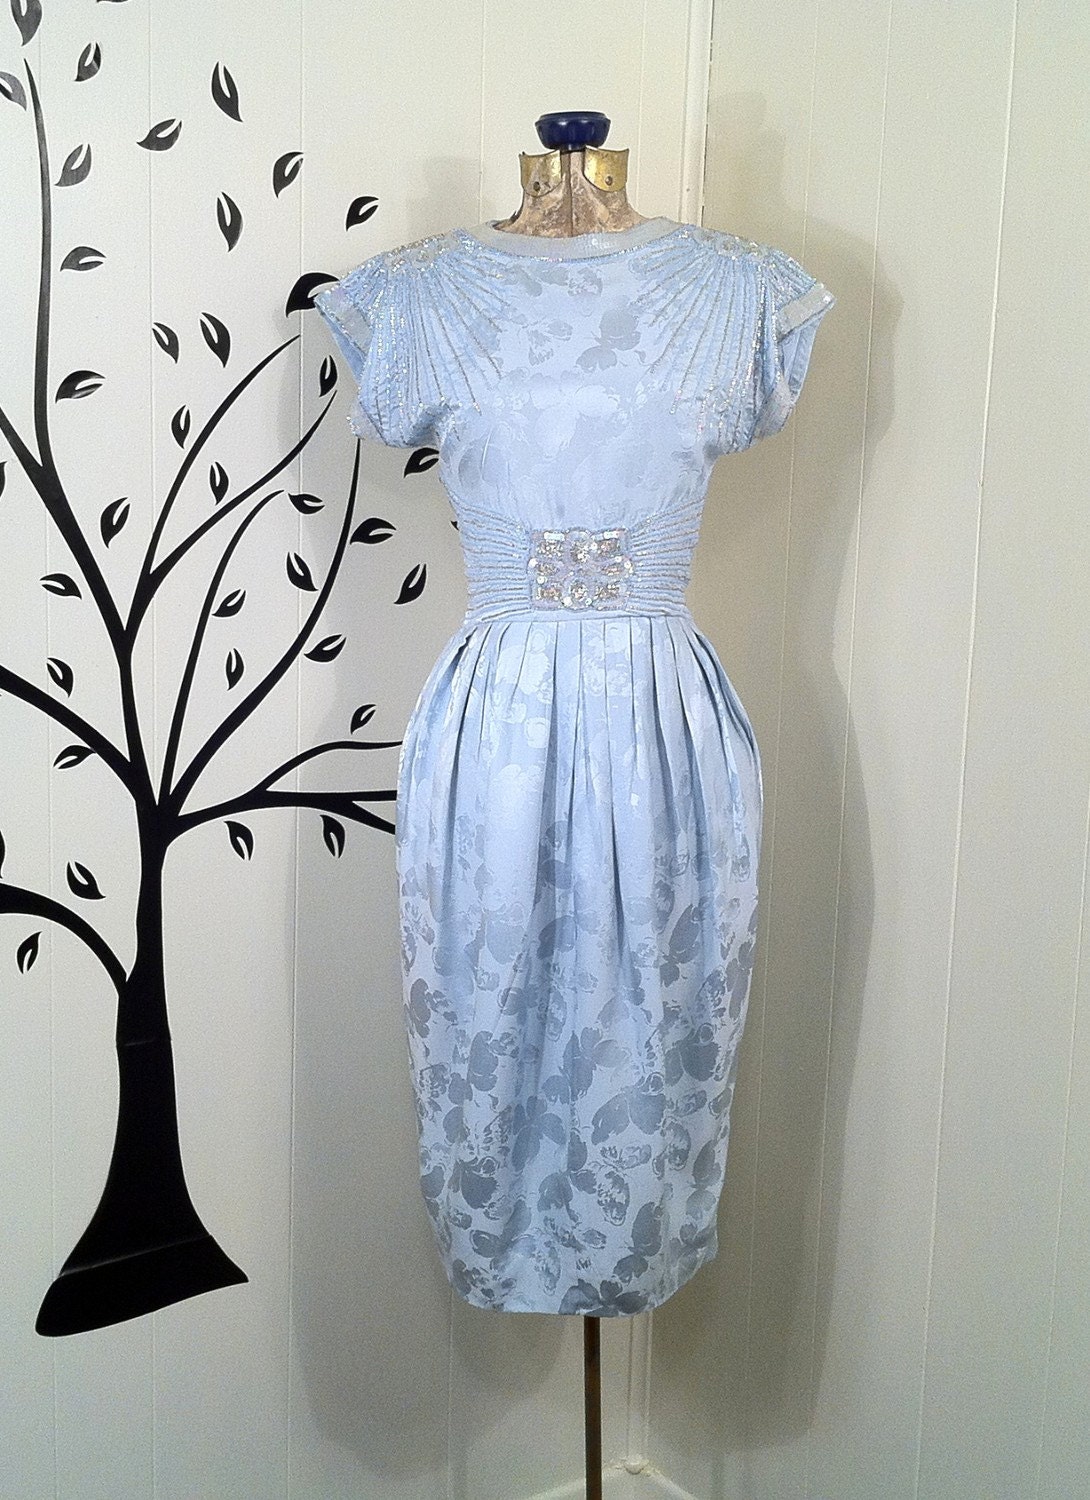 Retro 80s Silk Cocktail Dress - Beading and Sequins - Sexy Wiggle - Light Blue - Subtle Floral Pattern - Open Back - Stunning